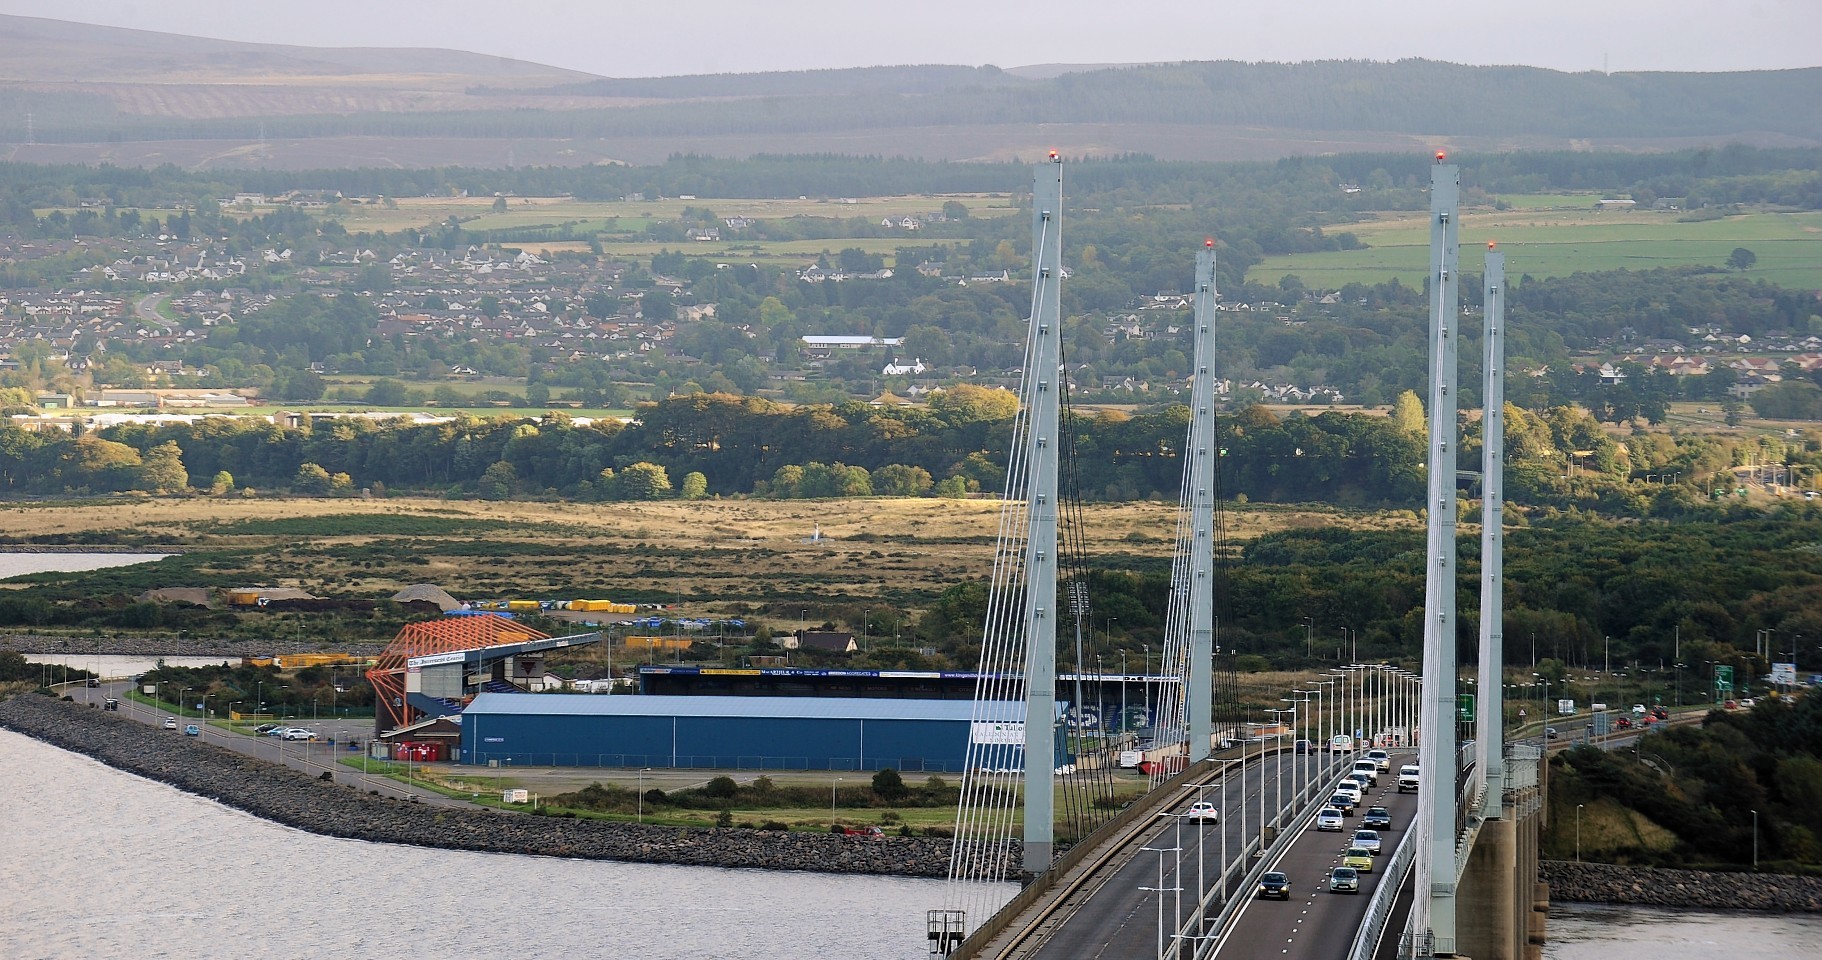 Looking north from the Kessock Bridge in Inverness. Picture by Sandy McCook